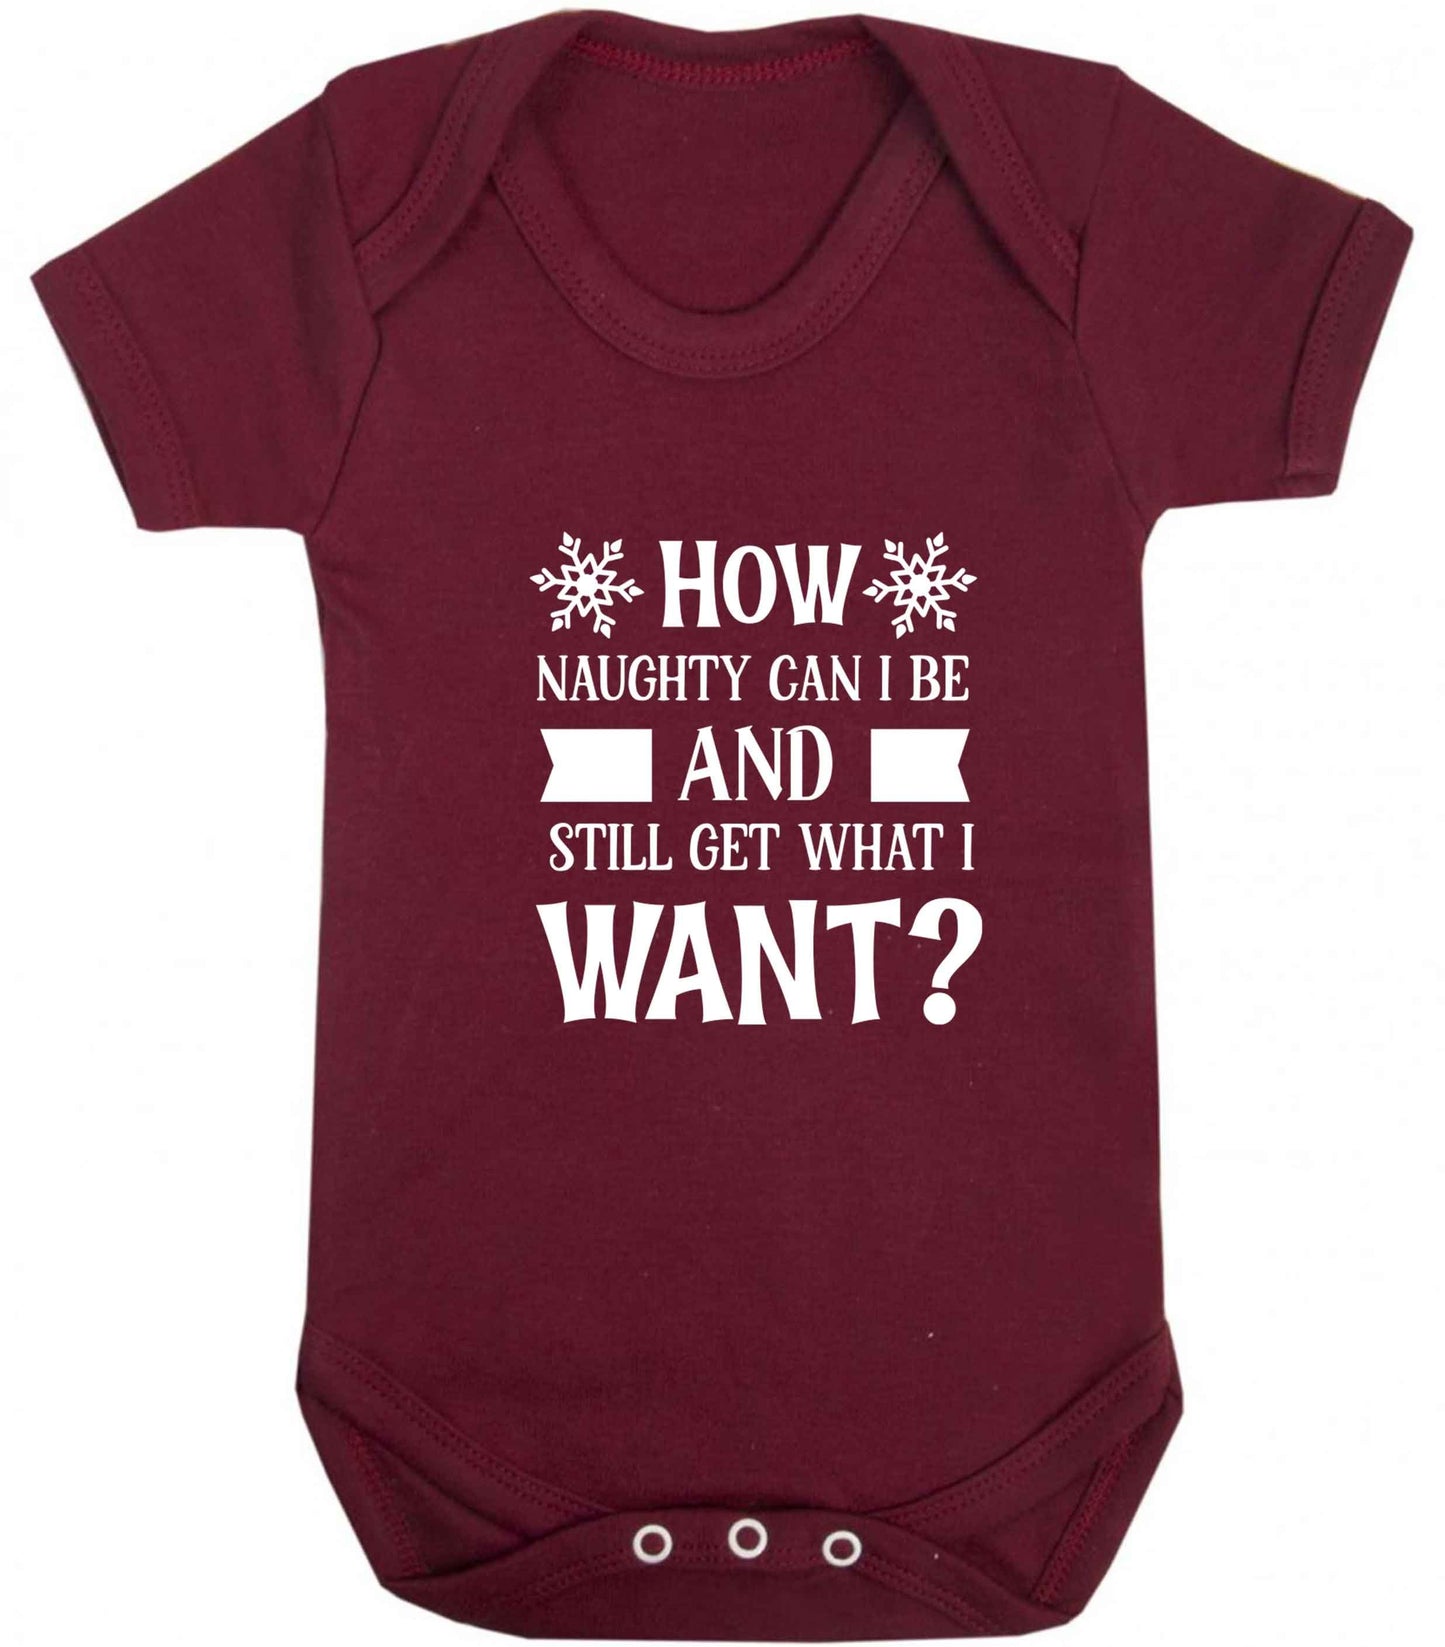 How naughty can I be and still get what I want? baby vest maroon 18-24 months